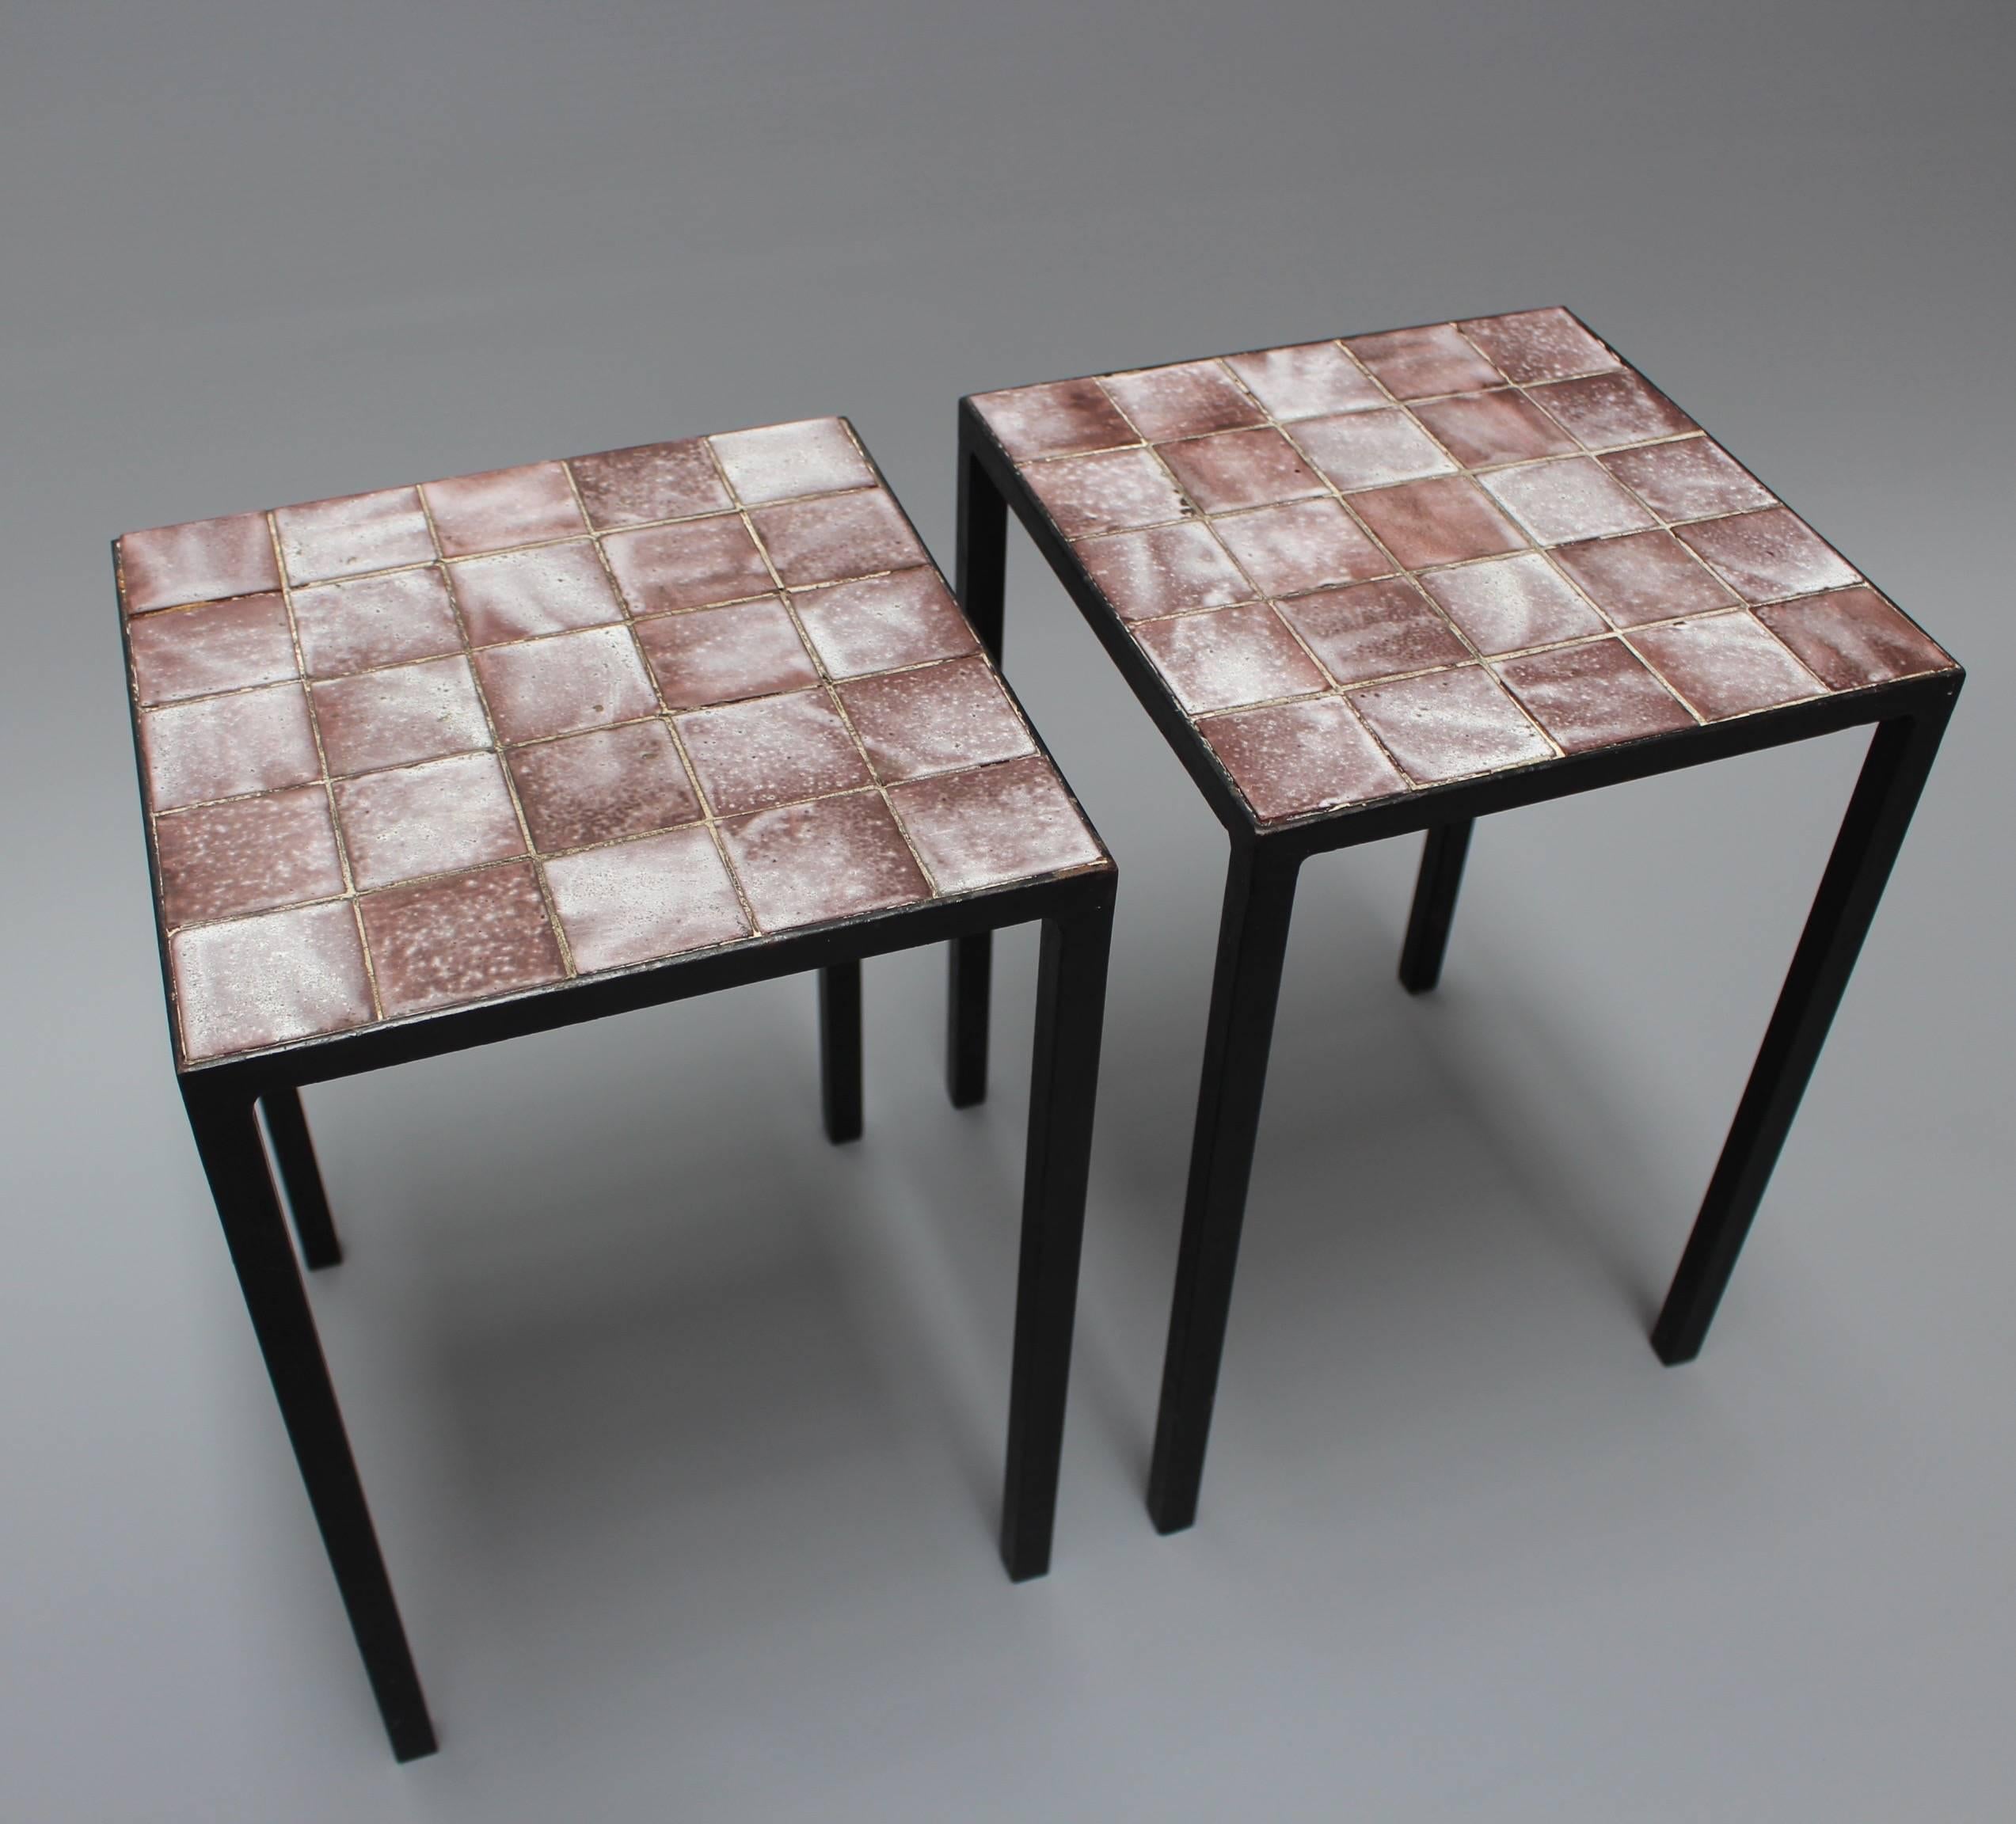 Set of Two Purple Ceramic Tiled Side Tables by Mado Jolain, circa 1950s -1960s 1